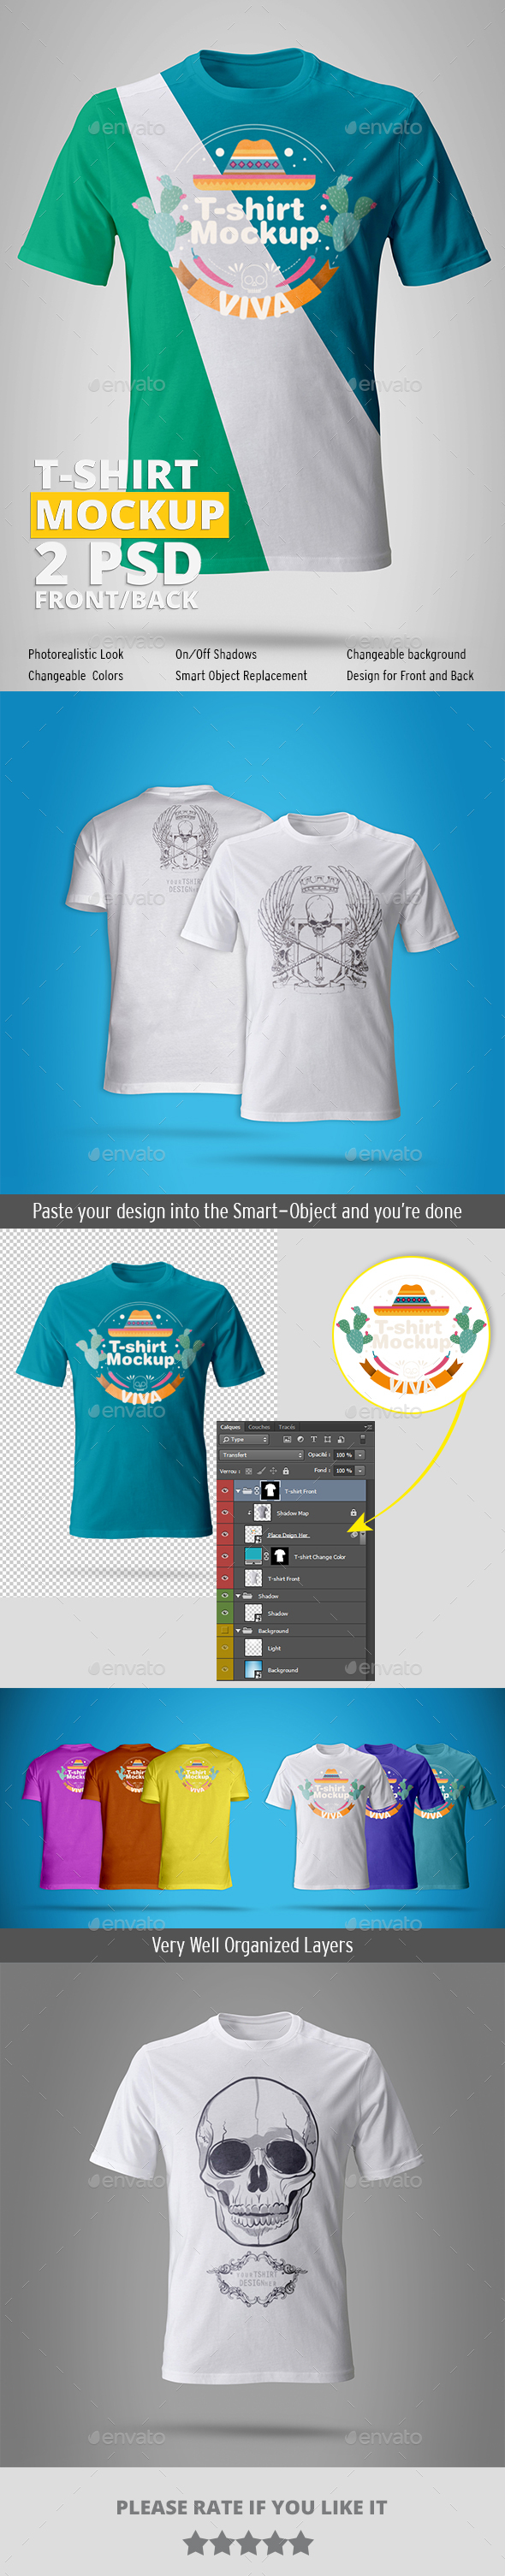 T-shirt Mockup by prodessin | GraphicRiver